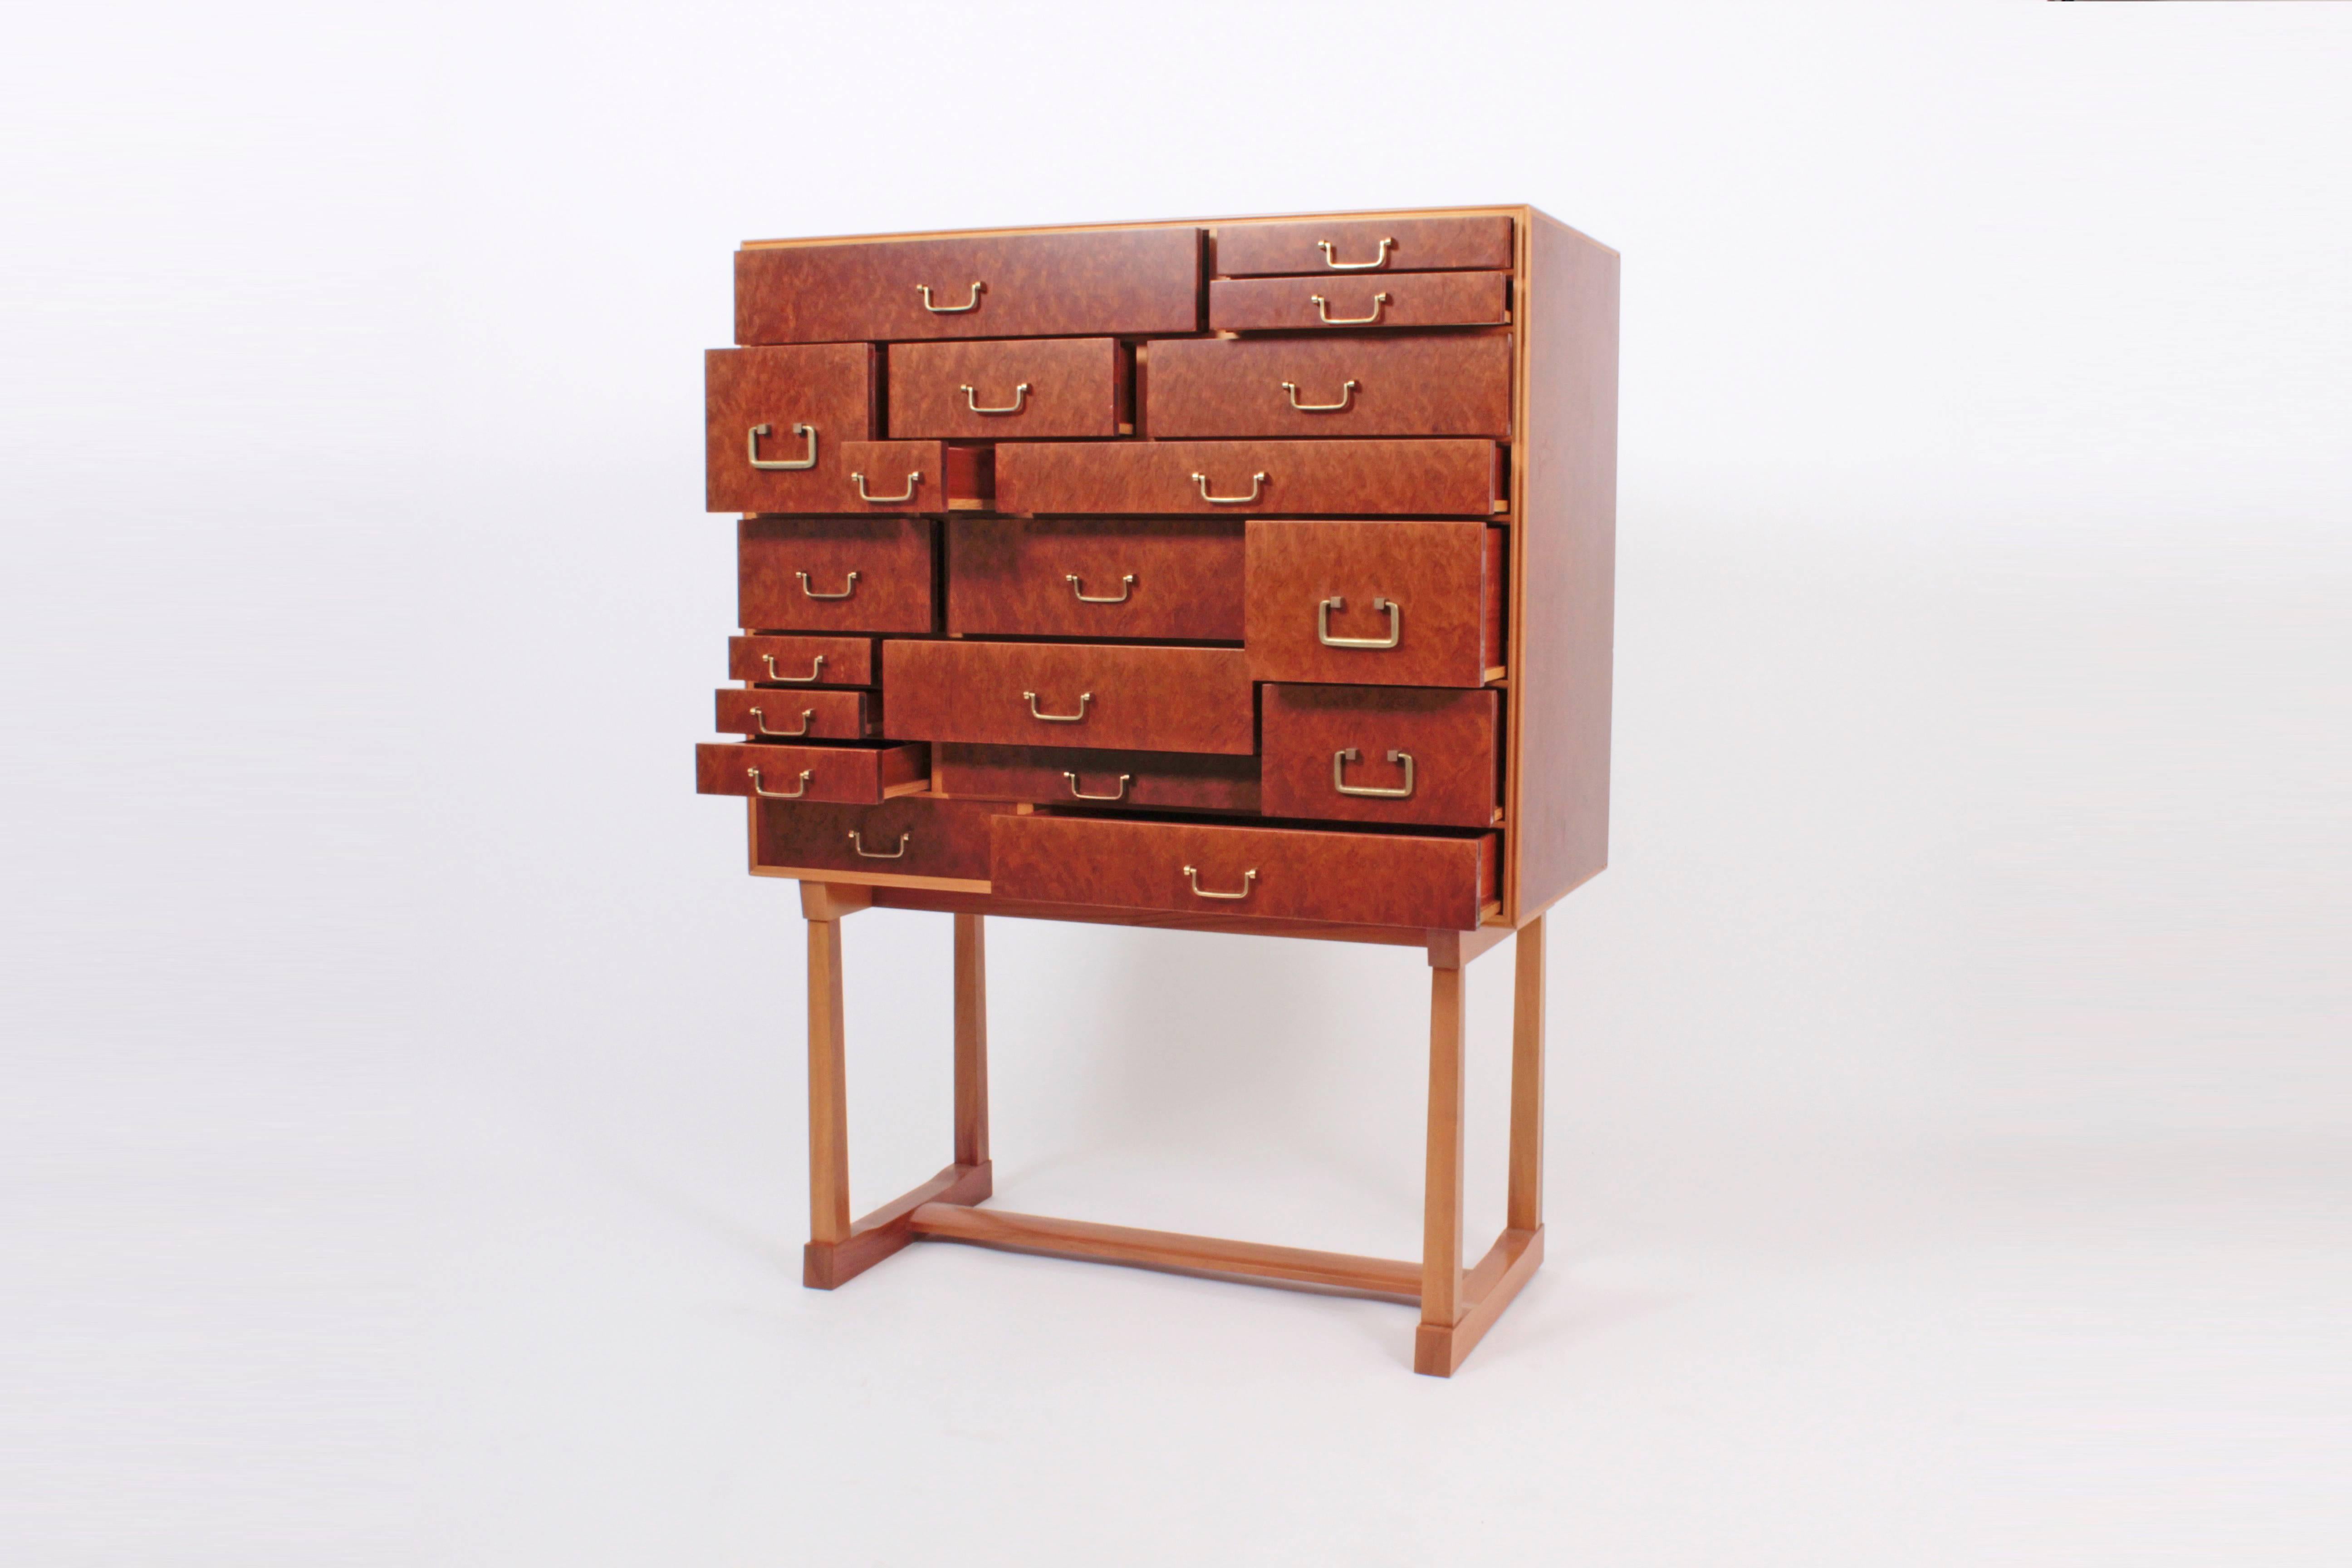 Josef Frank cabinet, designed in 1938 for the Academic School of arts of Stockholm in 1938.
This cabinet was produced by Svensk Tenn, and is marked in the back.
Amboyna burl veneer, mahogany structure and birch.
19 asymmetrical drawers with